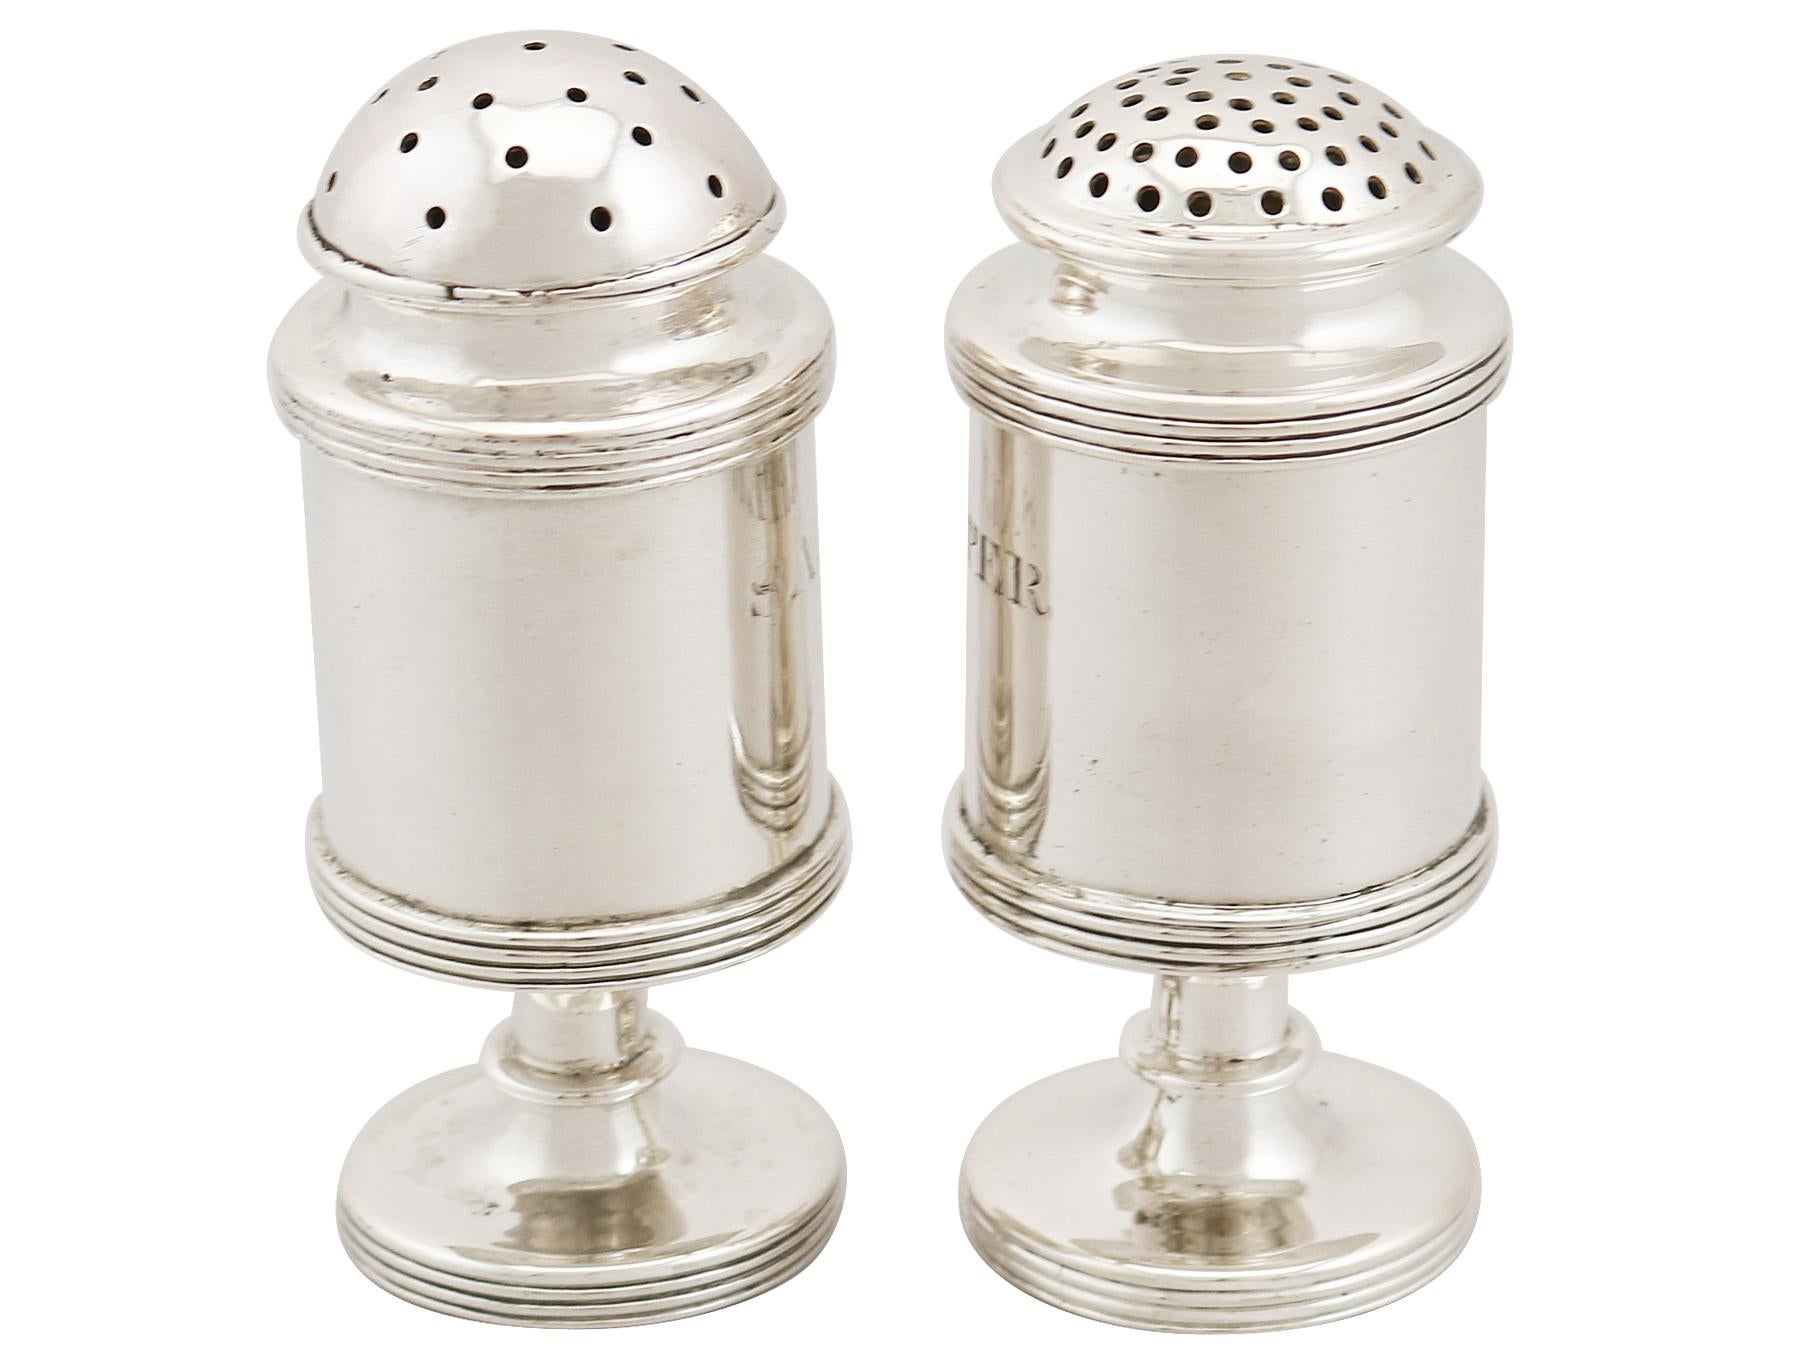 An exceptional, fine and impressive, large pair of antique Indian colonial silver salt and pepper shakers; an addition to our silver cruets/condiments collection.

These exceptional antique Indian colonial silver salt and pepper shakers have a